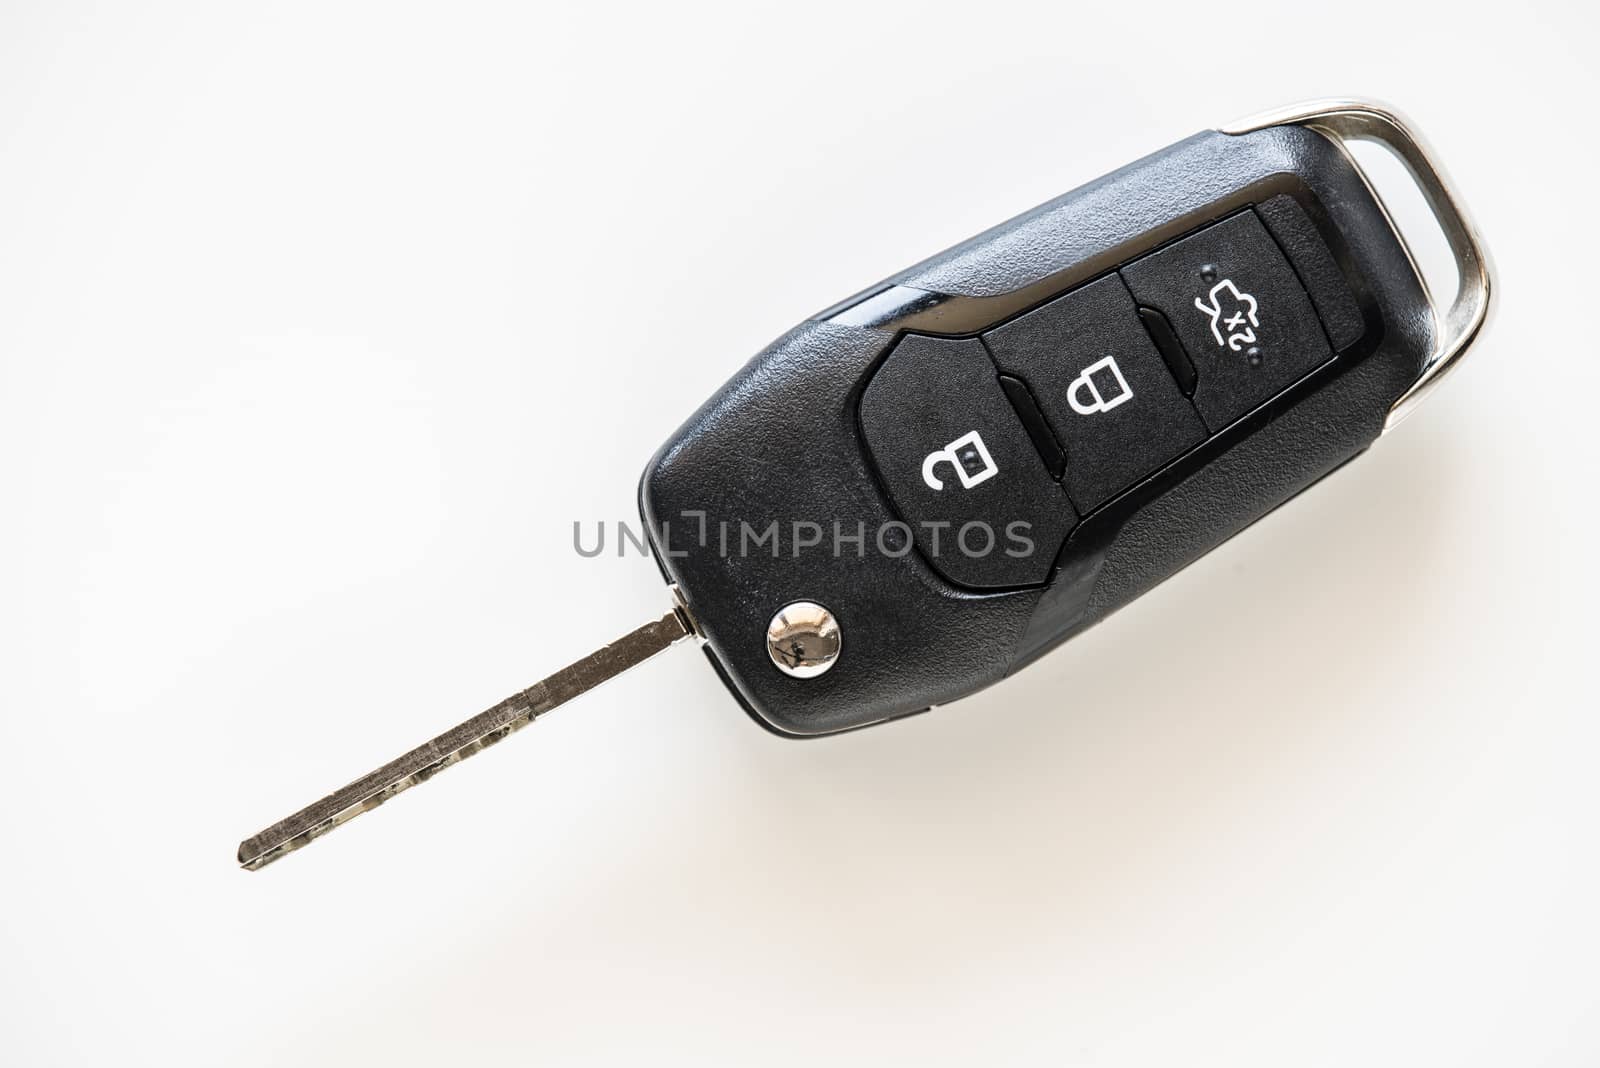 Remote electronic car key by AlessandroZocc